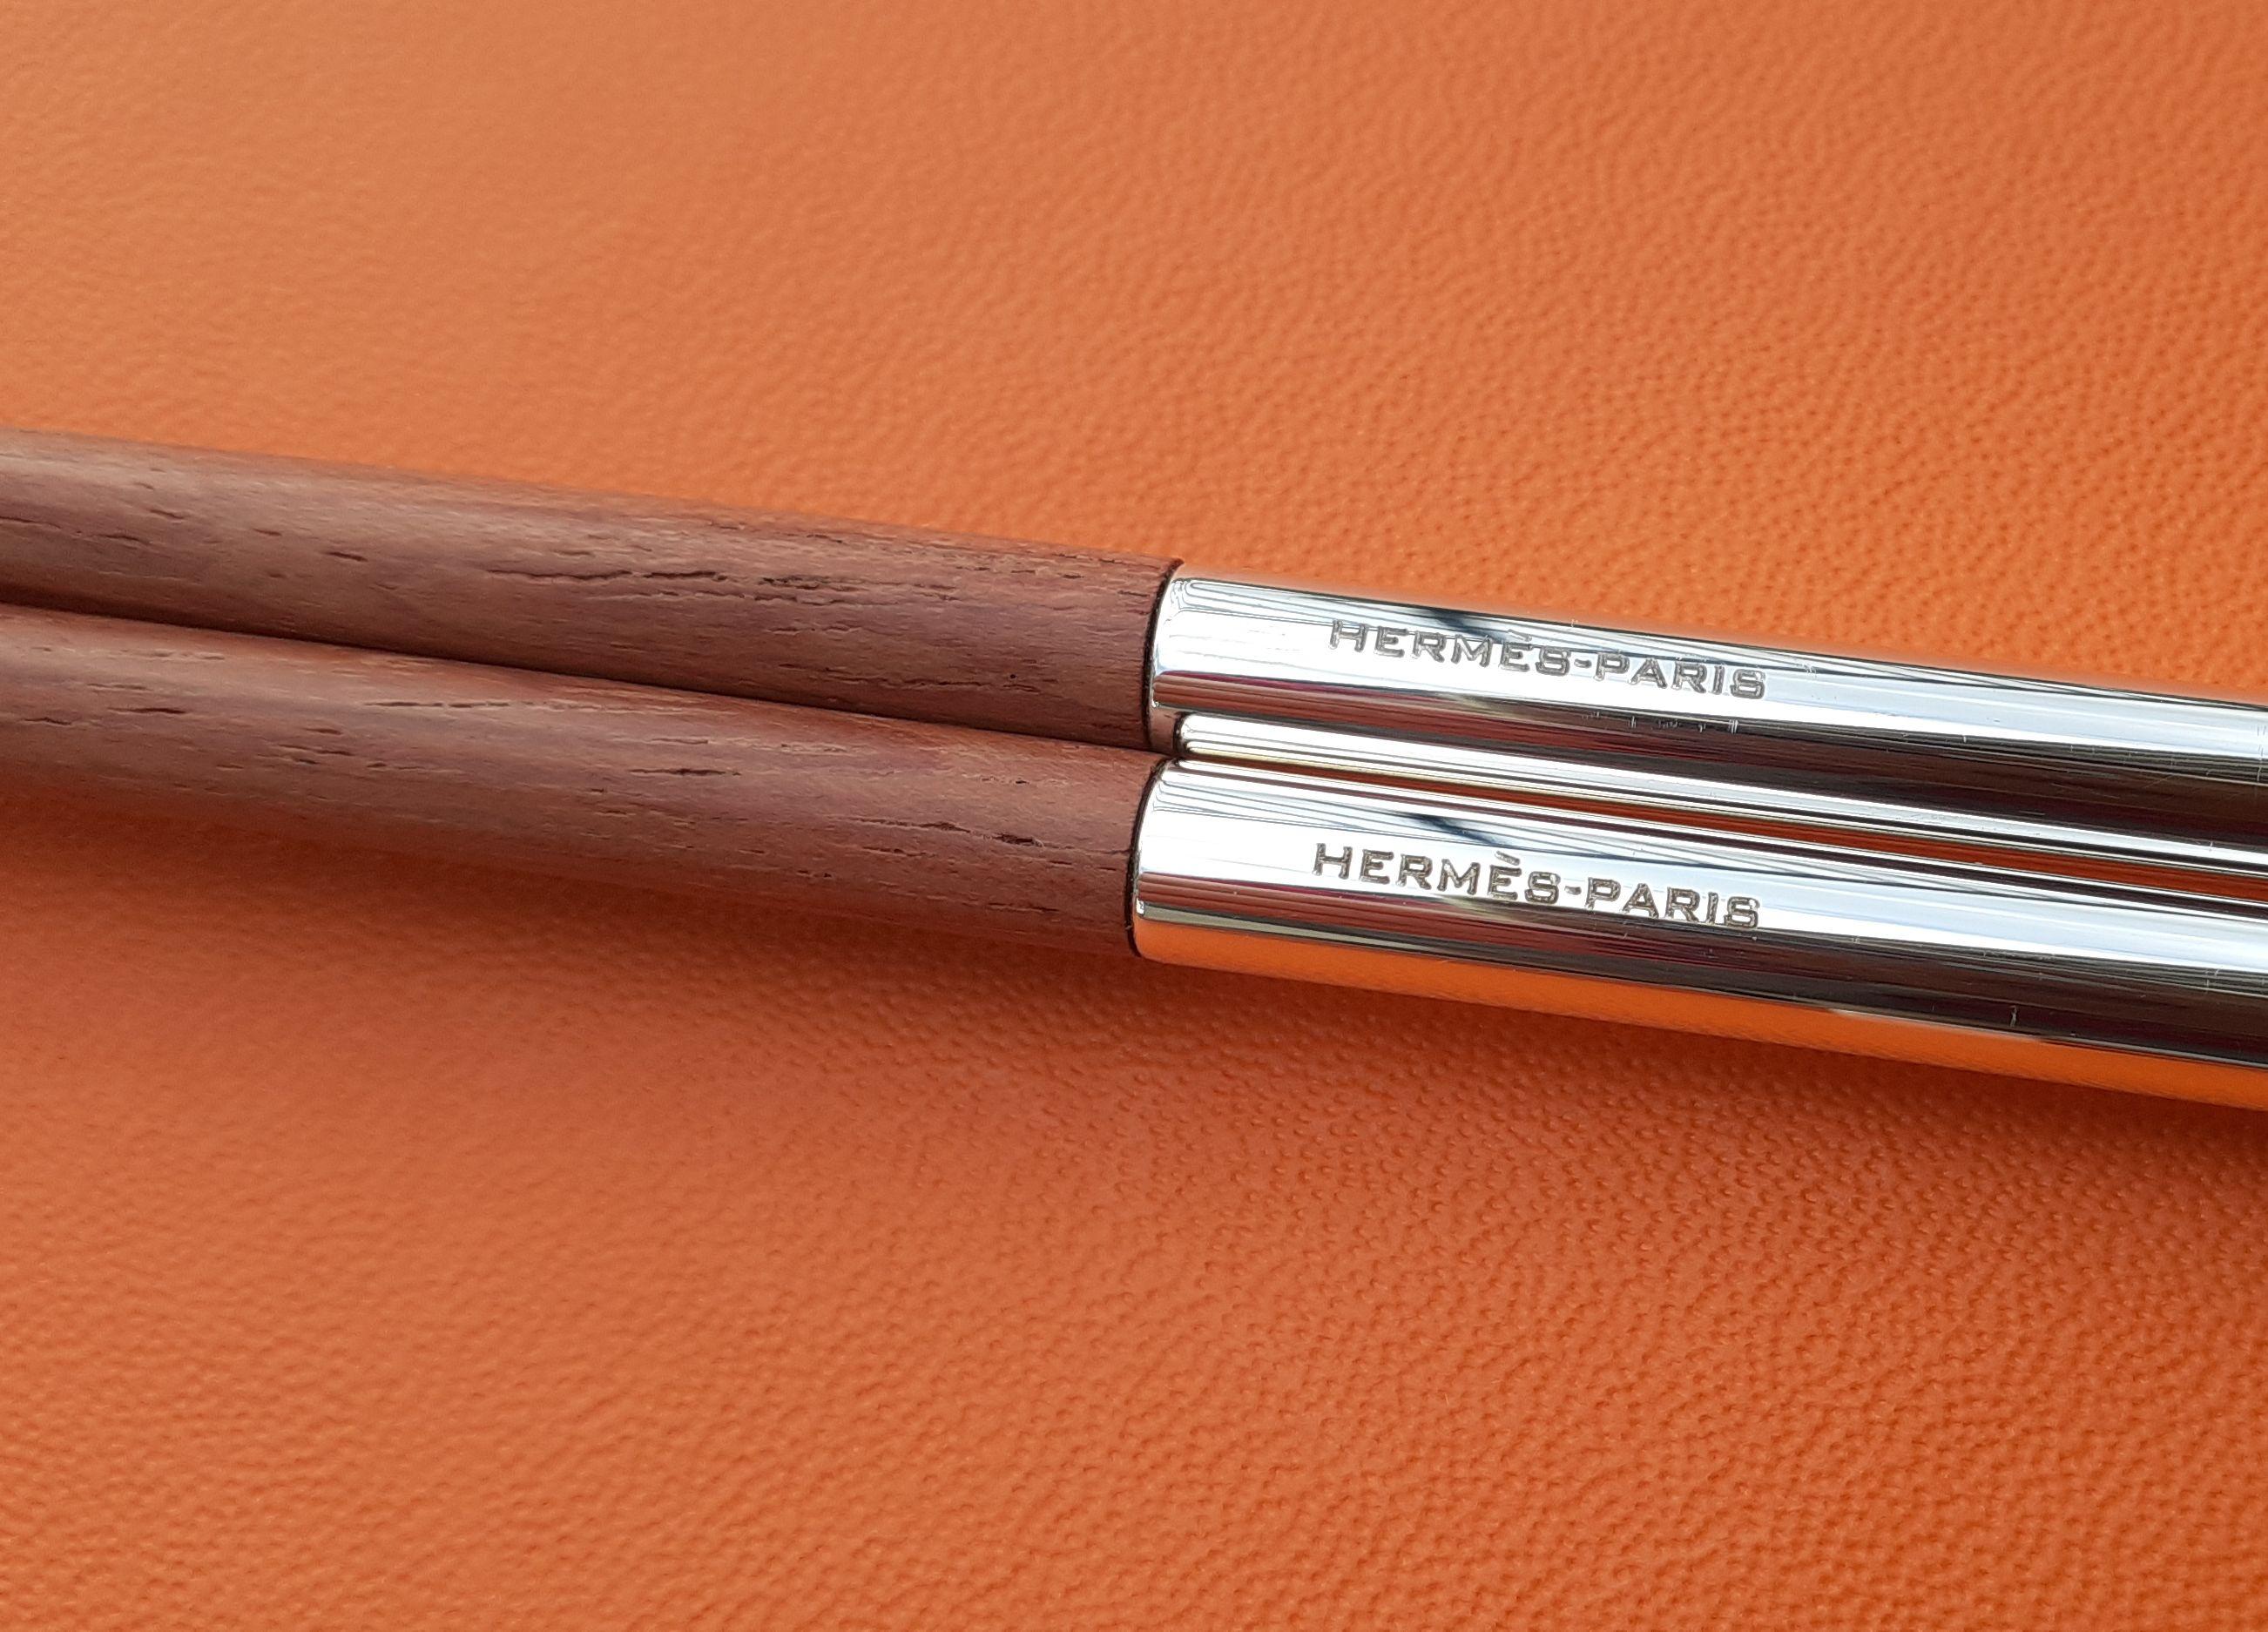 Exceptional Hermès Set of 2 pairs of Chopsticks in wood For Sale 3